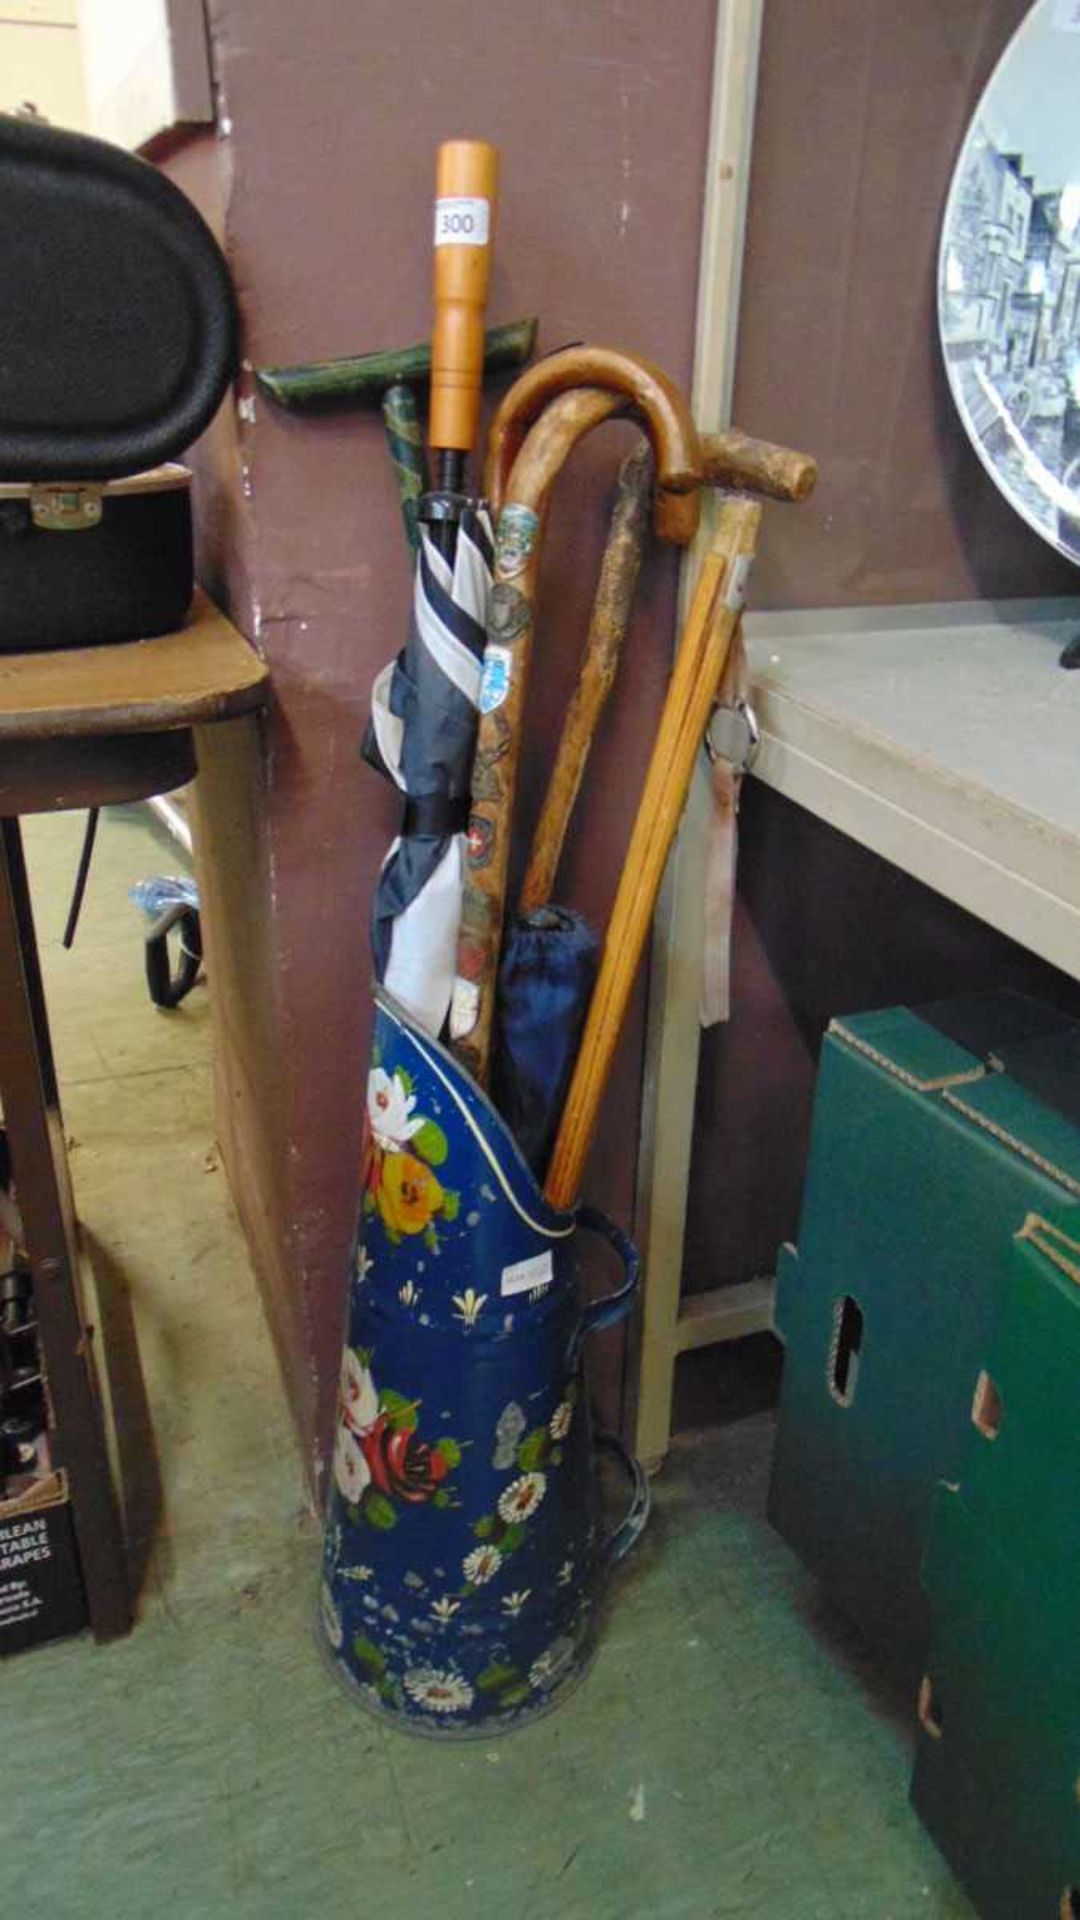 An assortment of walking sticks and umbrellas in a painted barge ware style coal scuttle